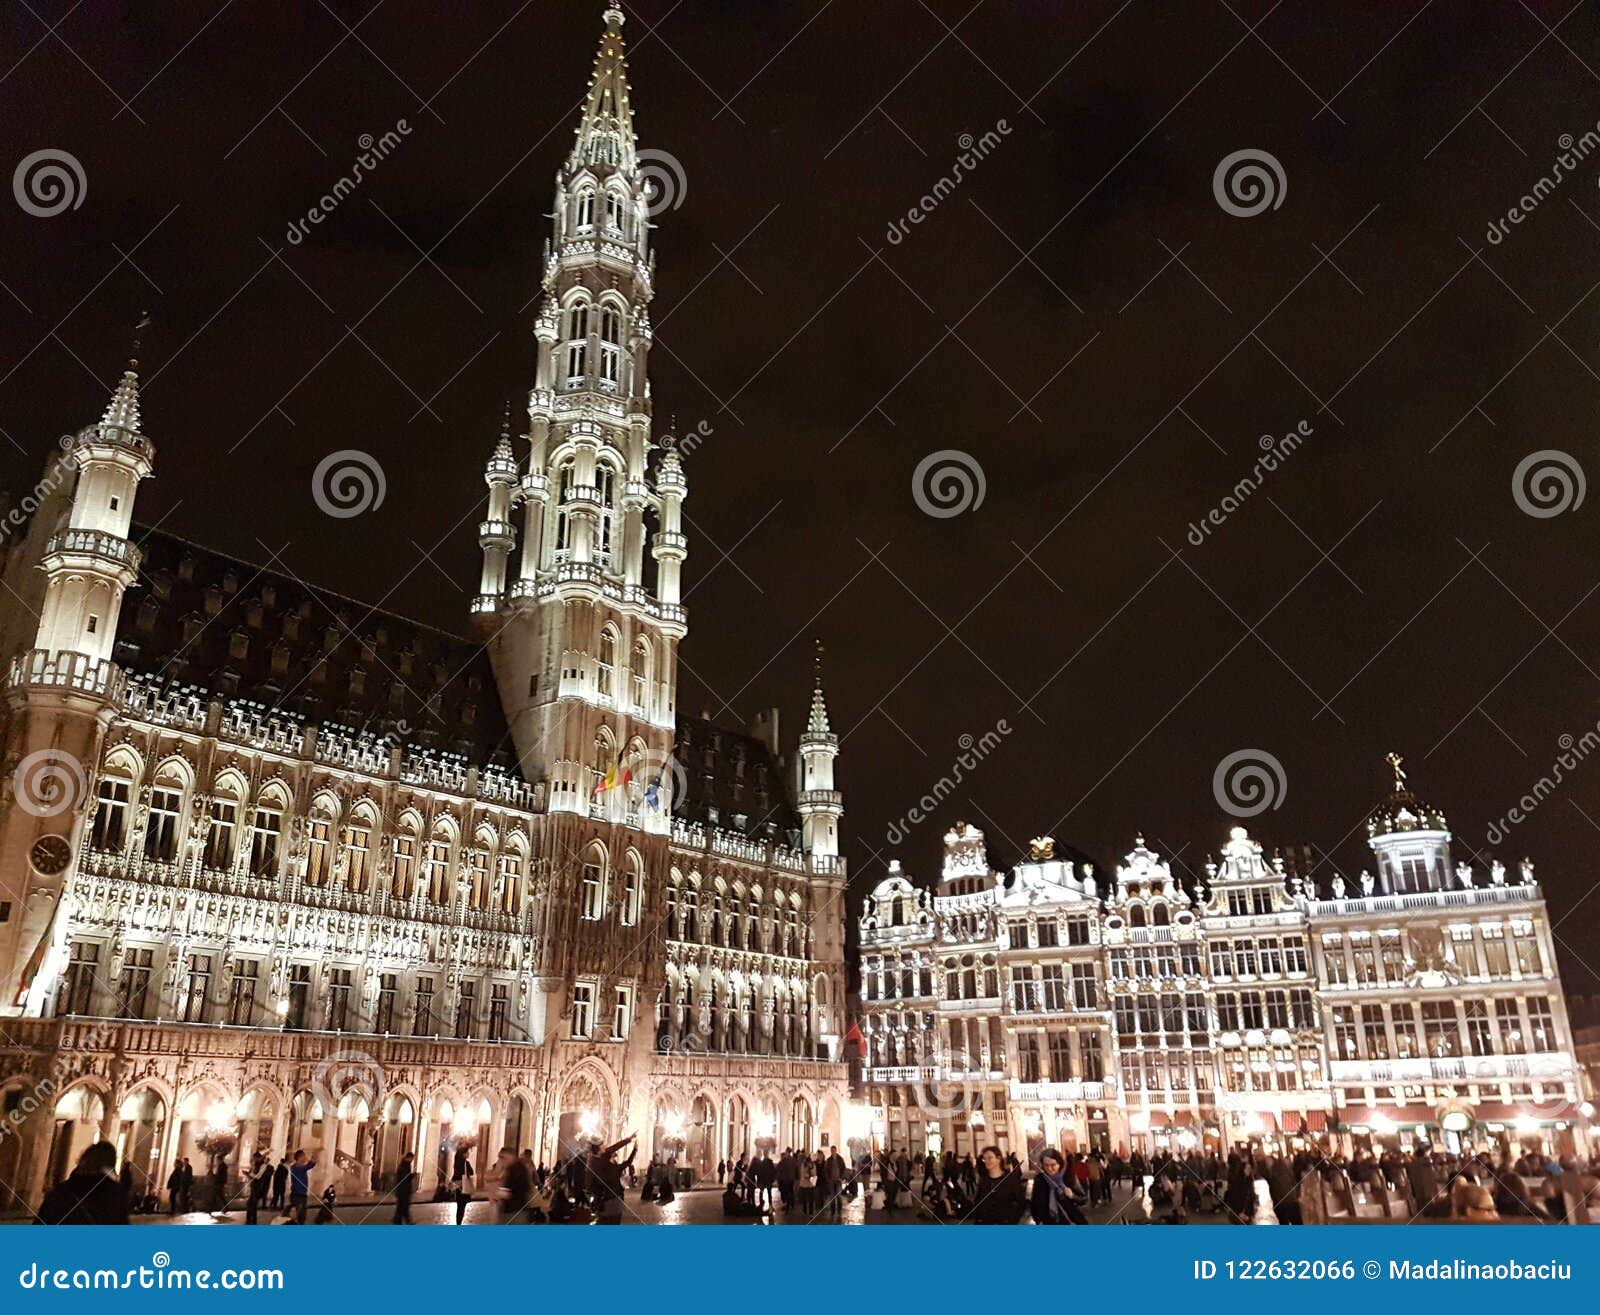 grand place of bruxelles